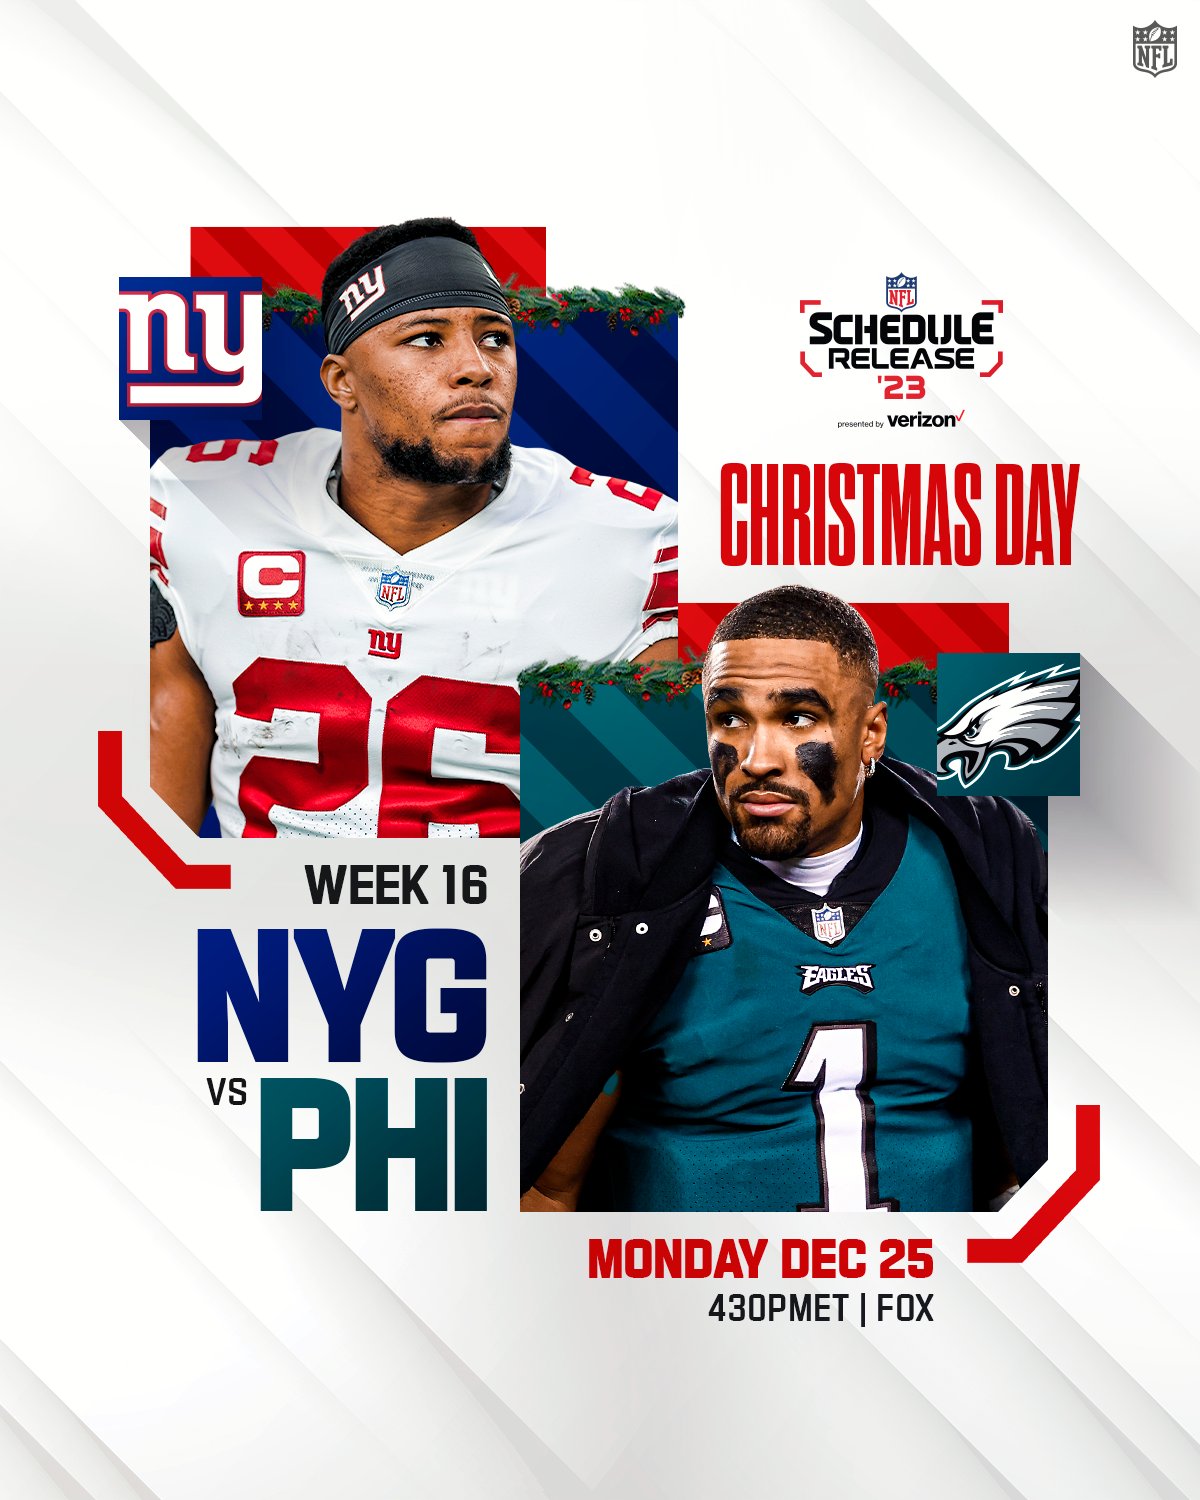 Dov Kleiman on X: "NFL Schedule Update: The #Giants play the #Eagles for a Christmas  Day game. https://t.co/WGGSztgpq1" / X